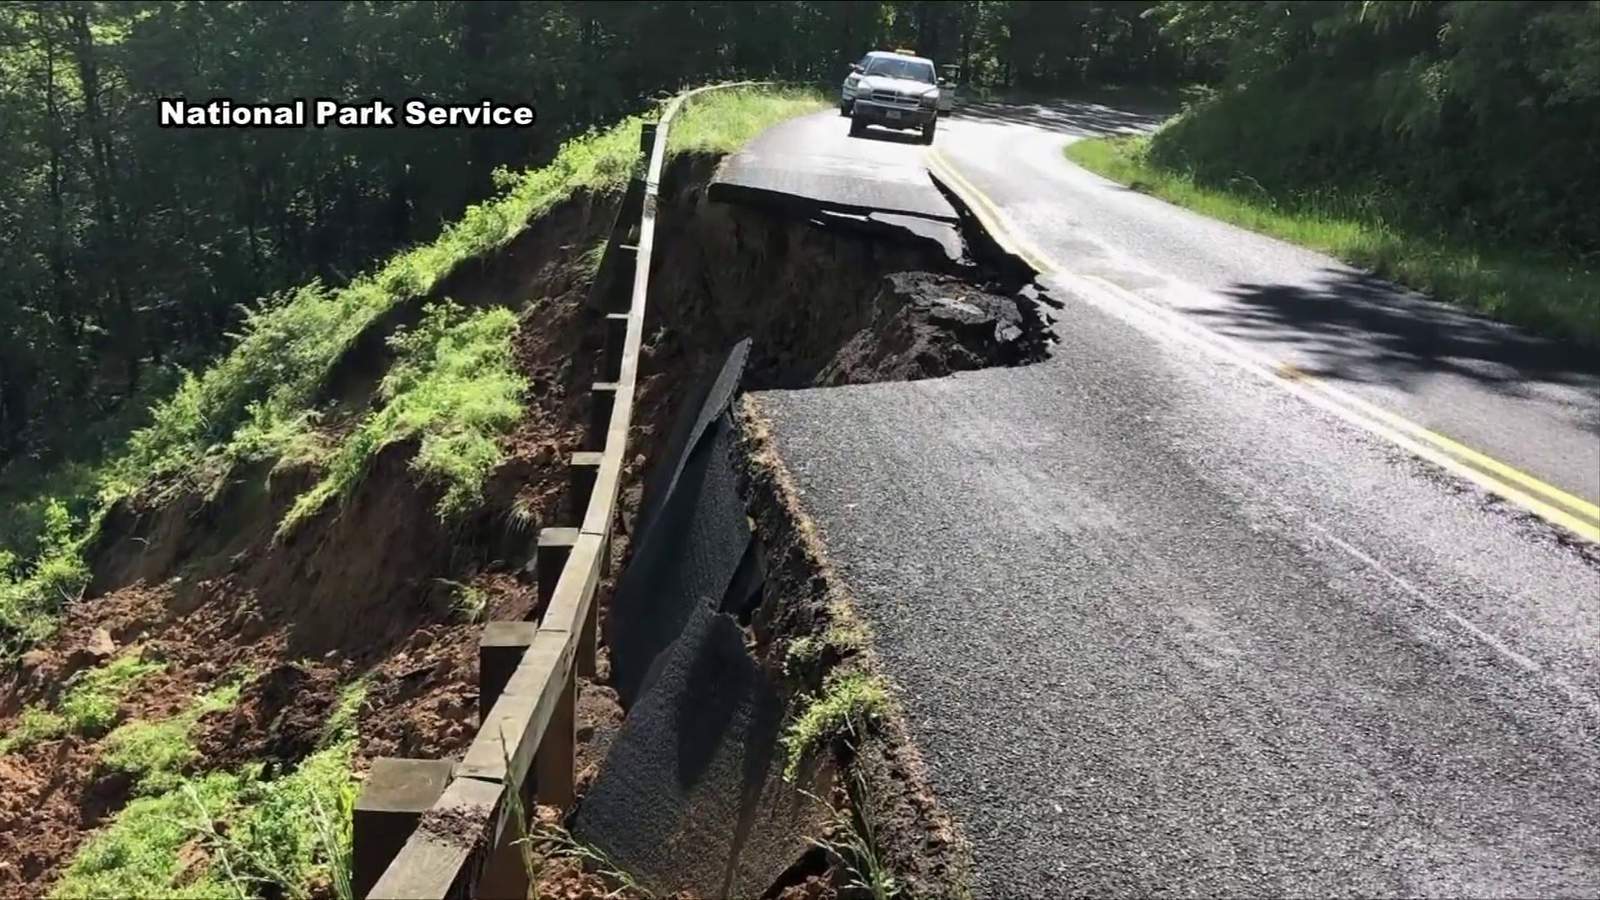 Road closures could last weeks after heavy rain washes out major roadways